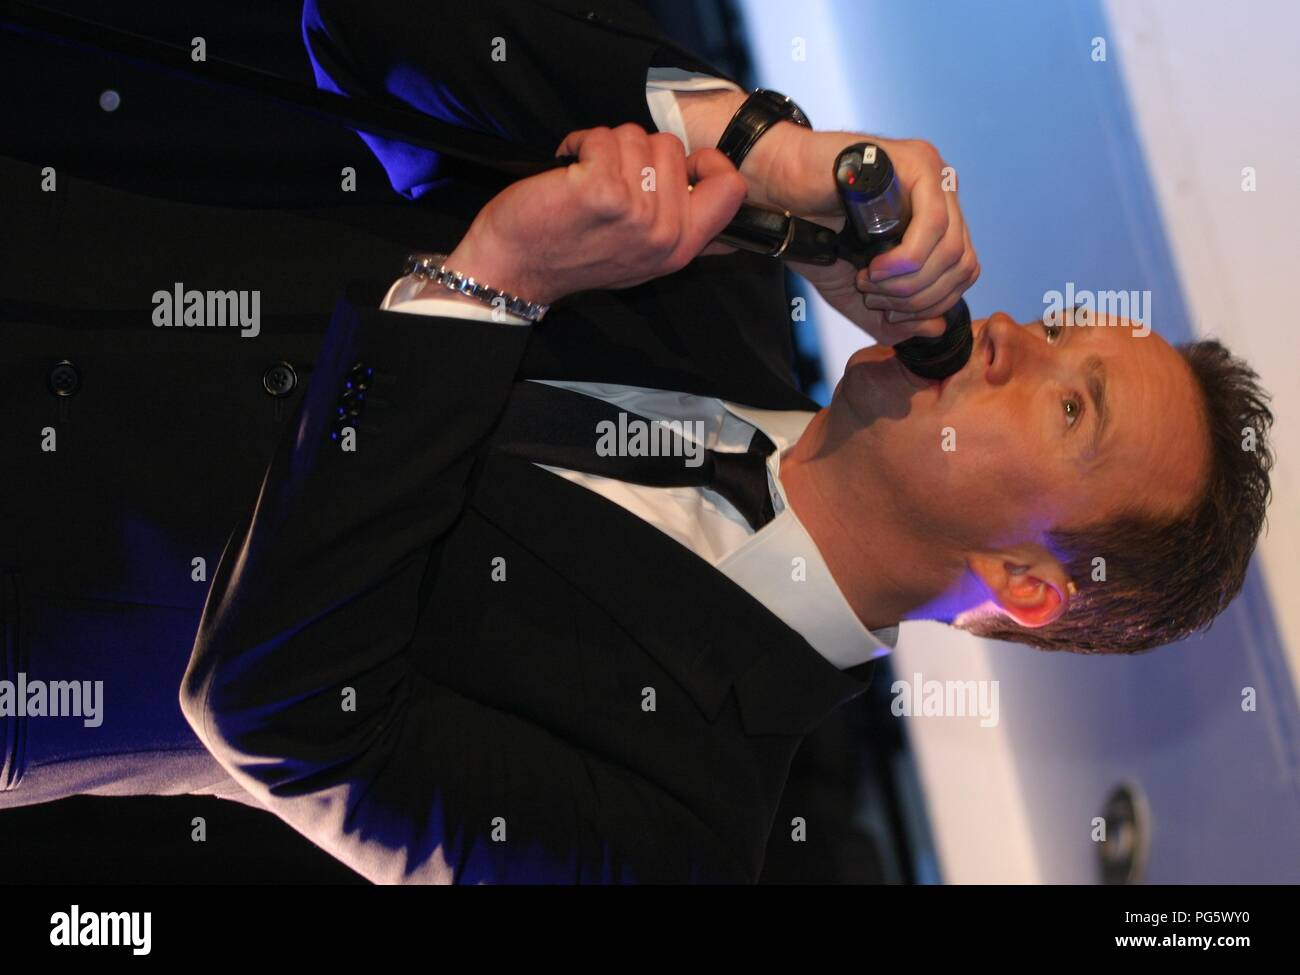 Liverpool,UK Opera star Russell Watson performs at Liverpool Philharmonic Hall to  a sell out crowd credit Ian Fairbrother/Alamy stock photos Stock Photo